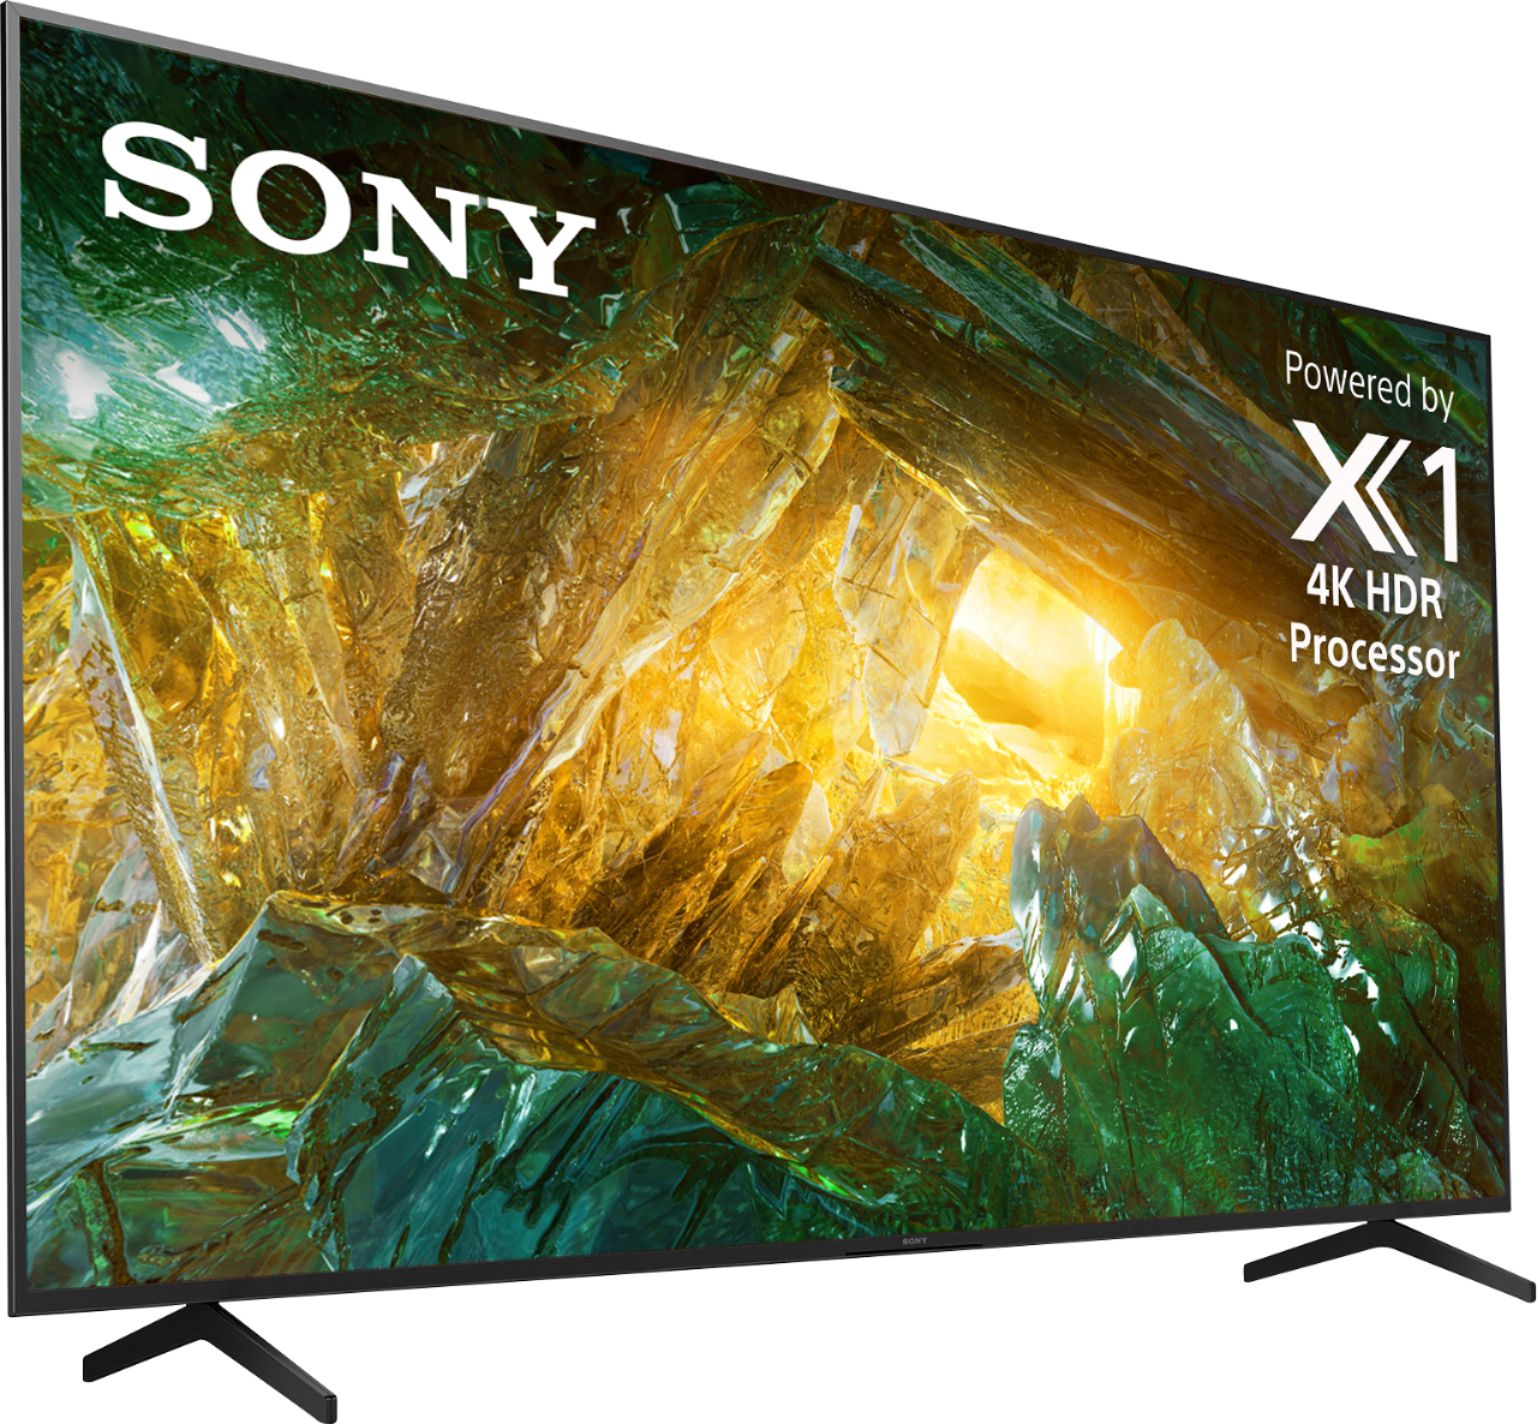 Angle View: Sony - 85" Class X800H Series LED 4K UHD Smart Android TV